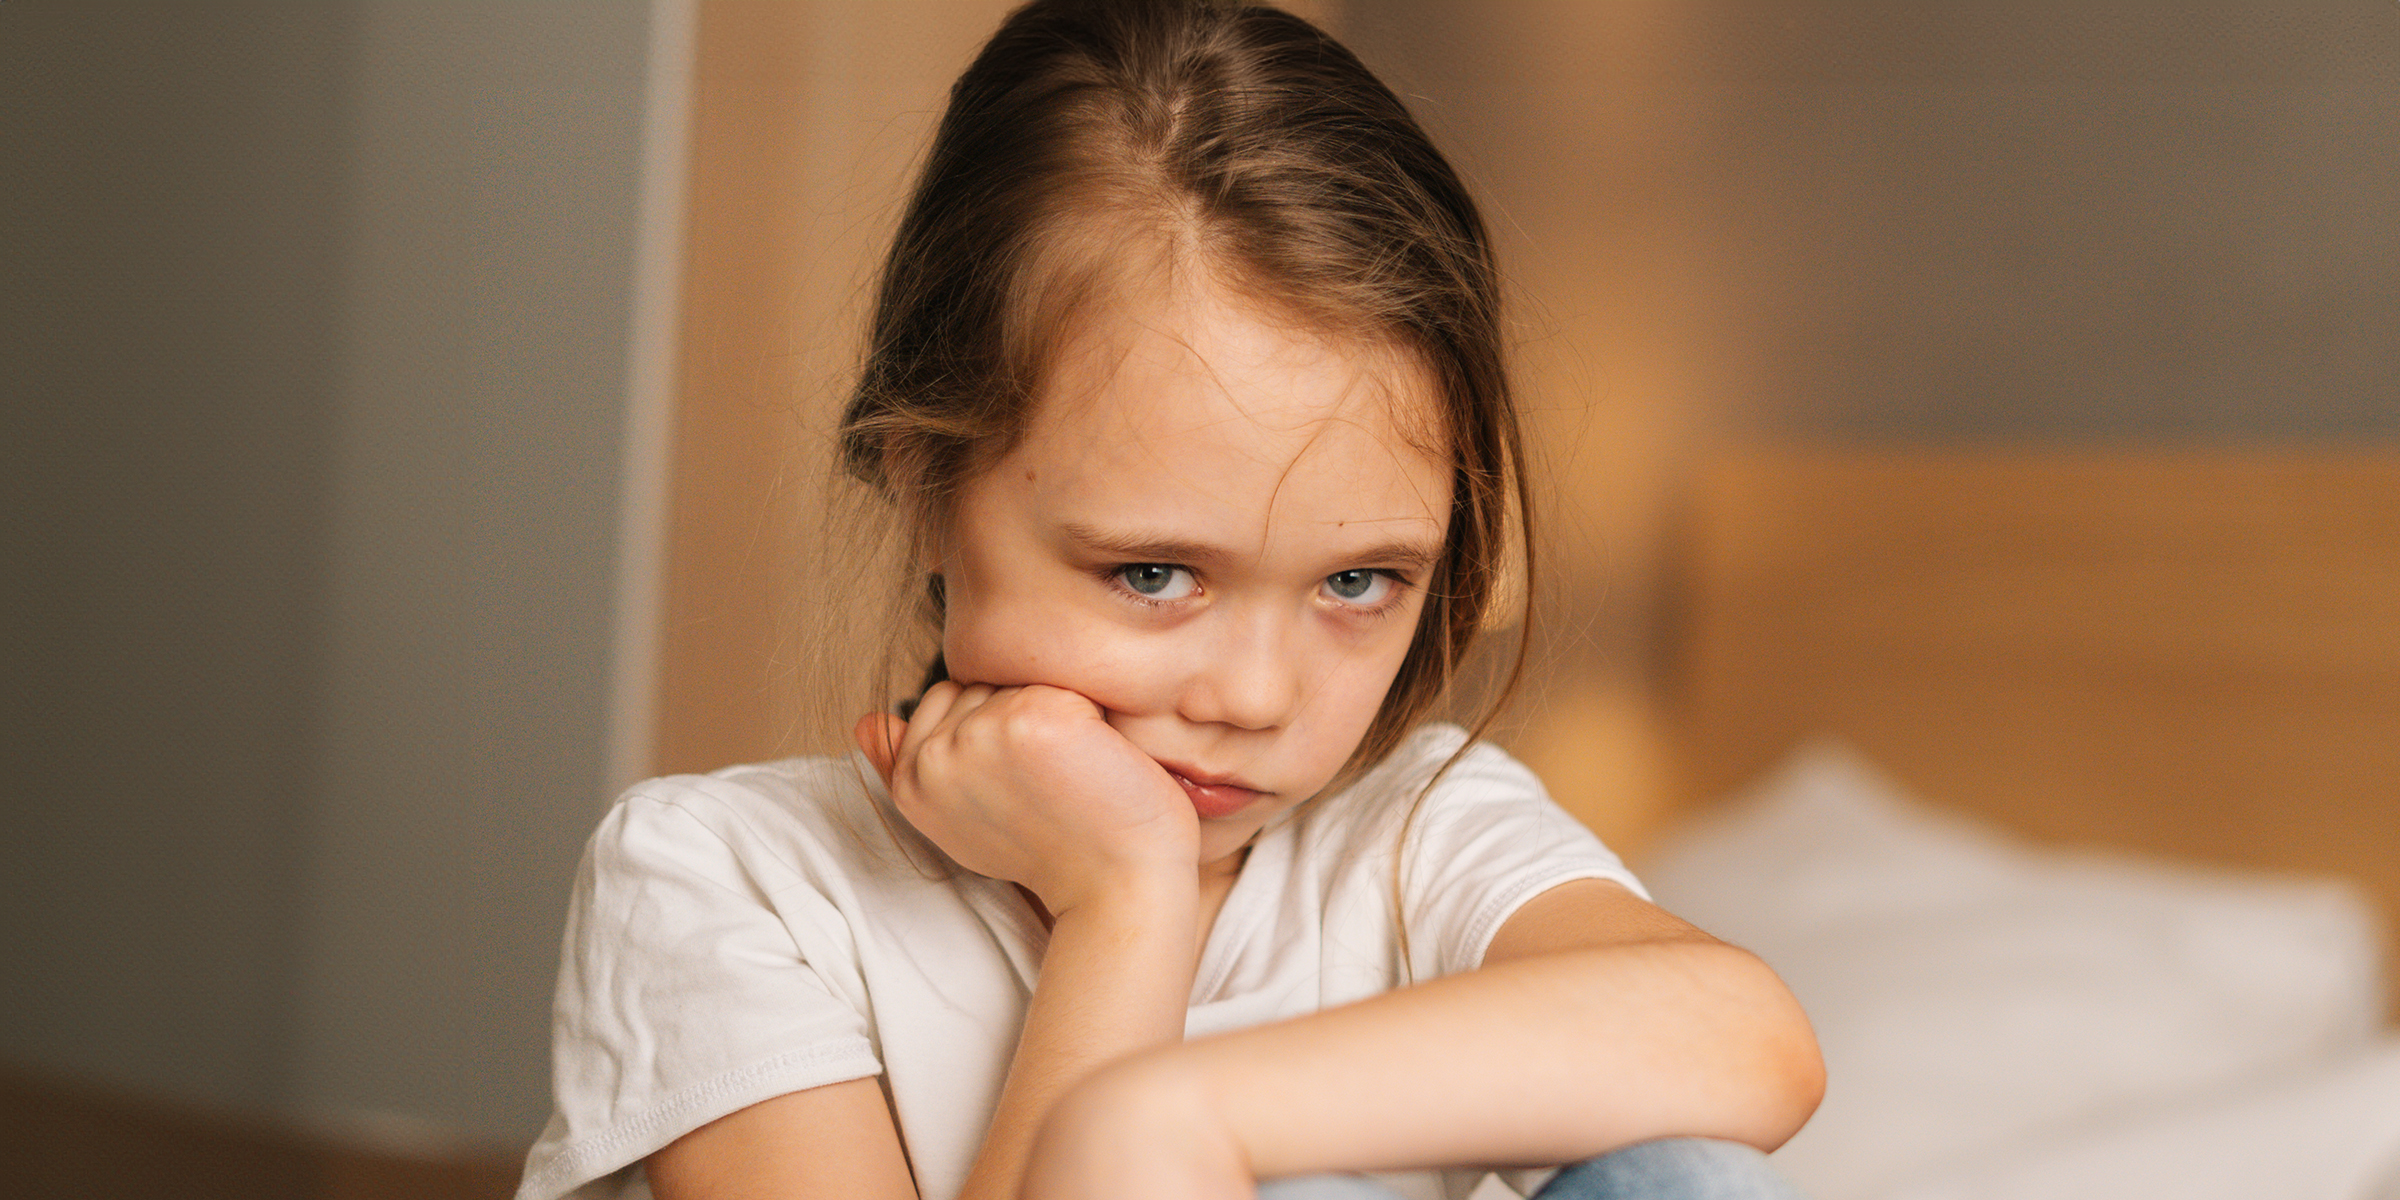 A sad and worried little girl | Source: Shutterstock